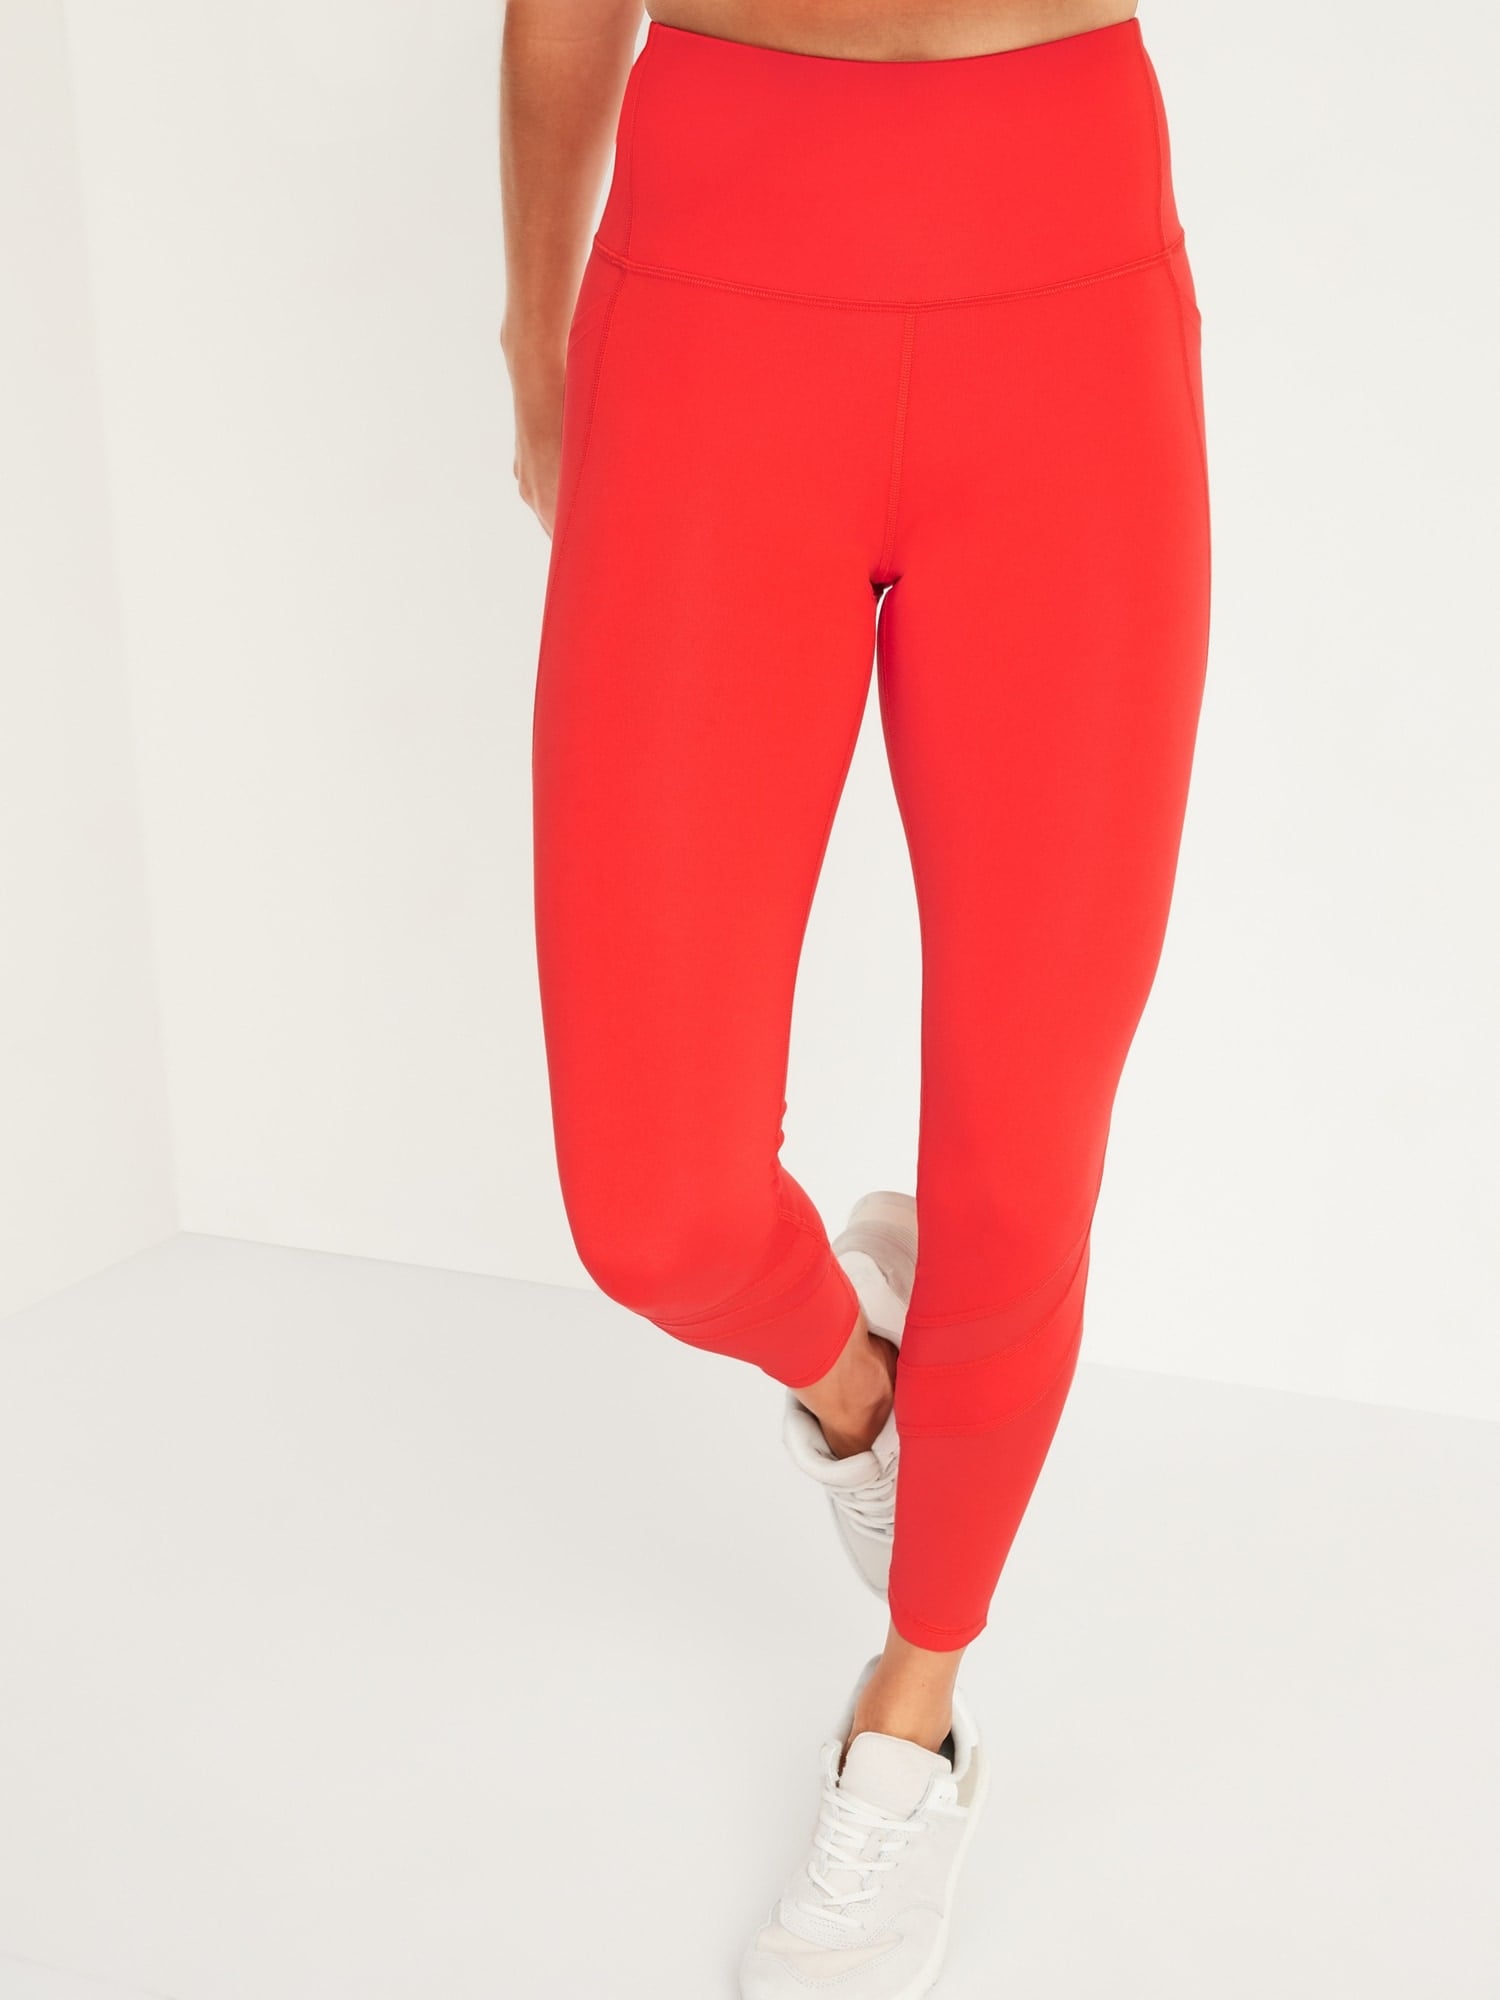 Best Old Navy Workout Clothes on Sale, October 2020